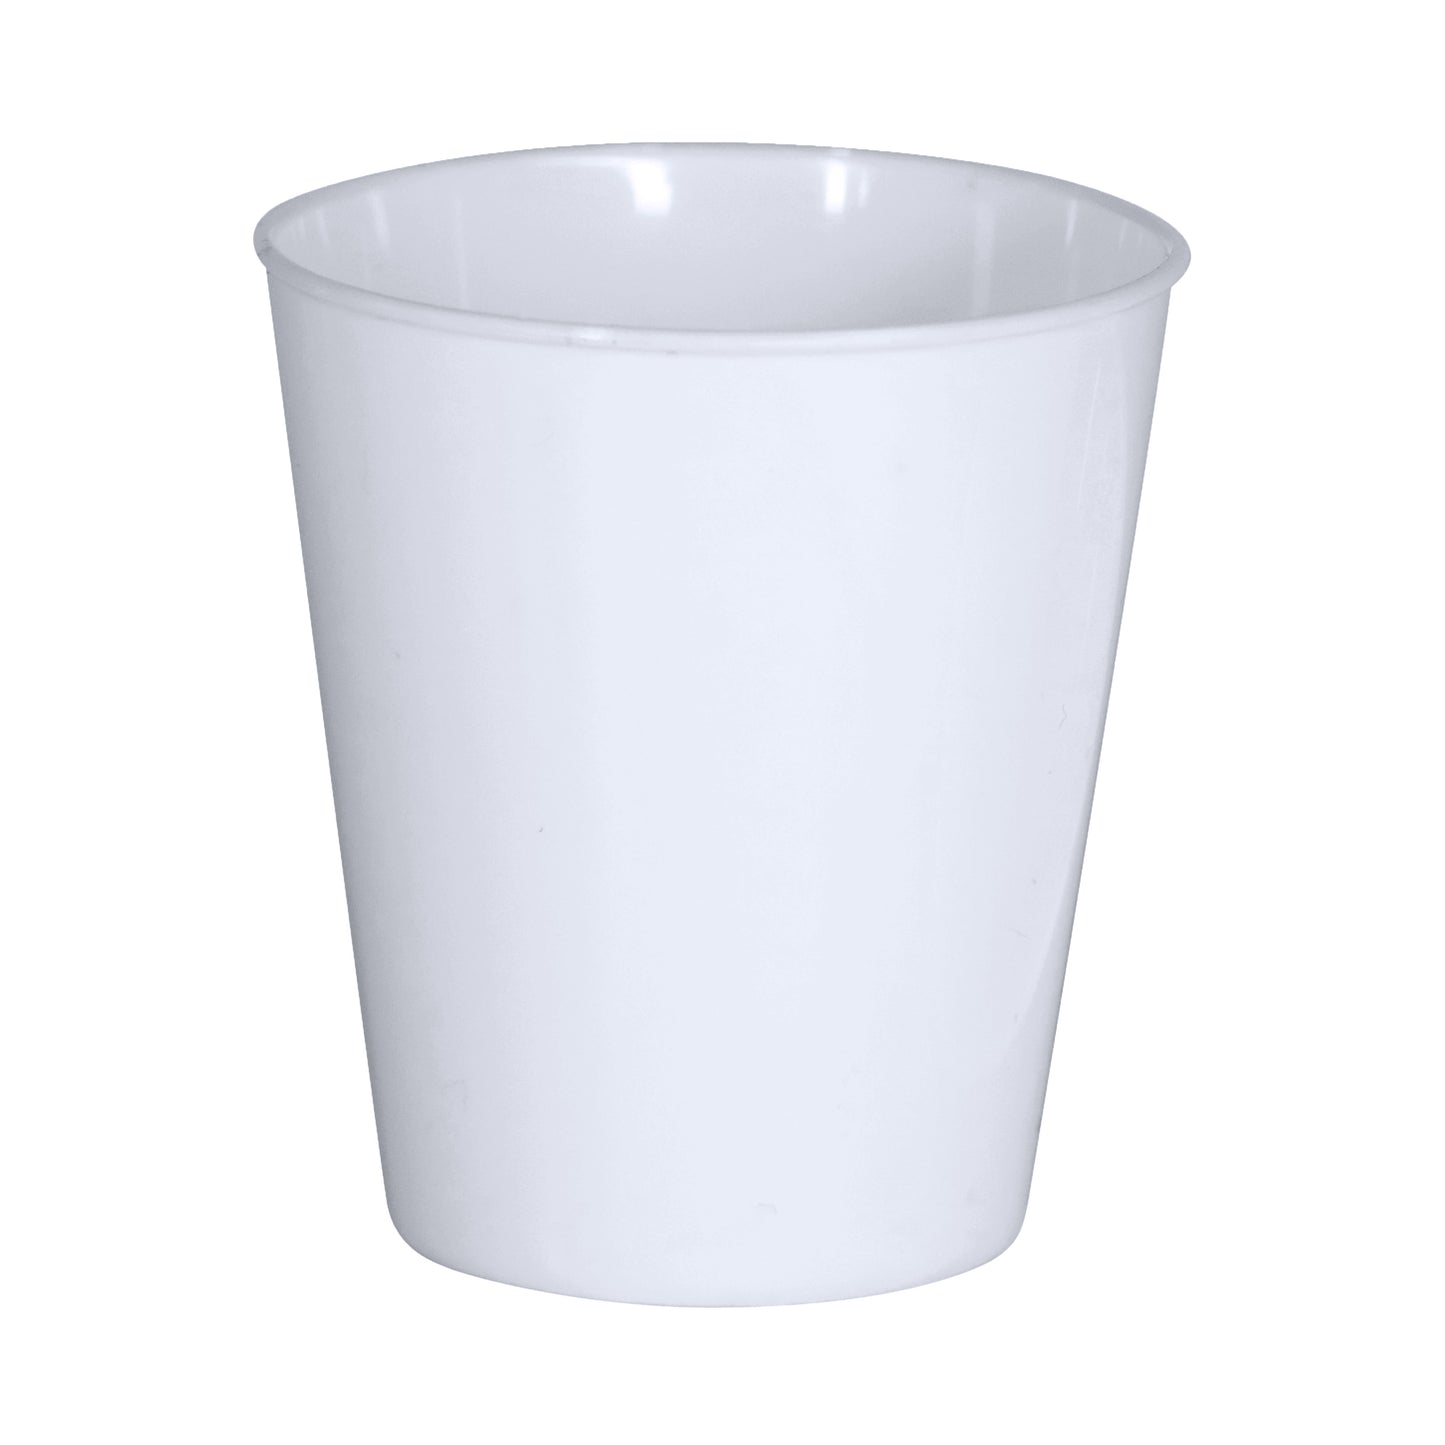 Pack of 50 White Biodegradable Plastic 50ml Shot Glasses 5cl cups - Great for jelly shots, liquor, weddings